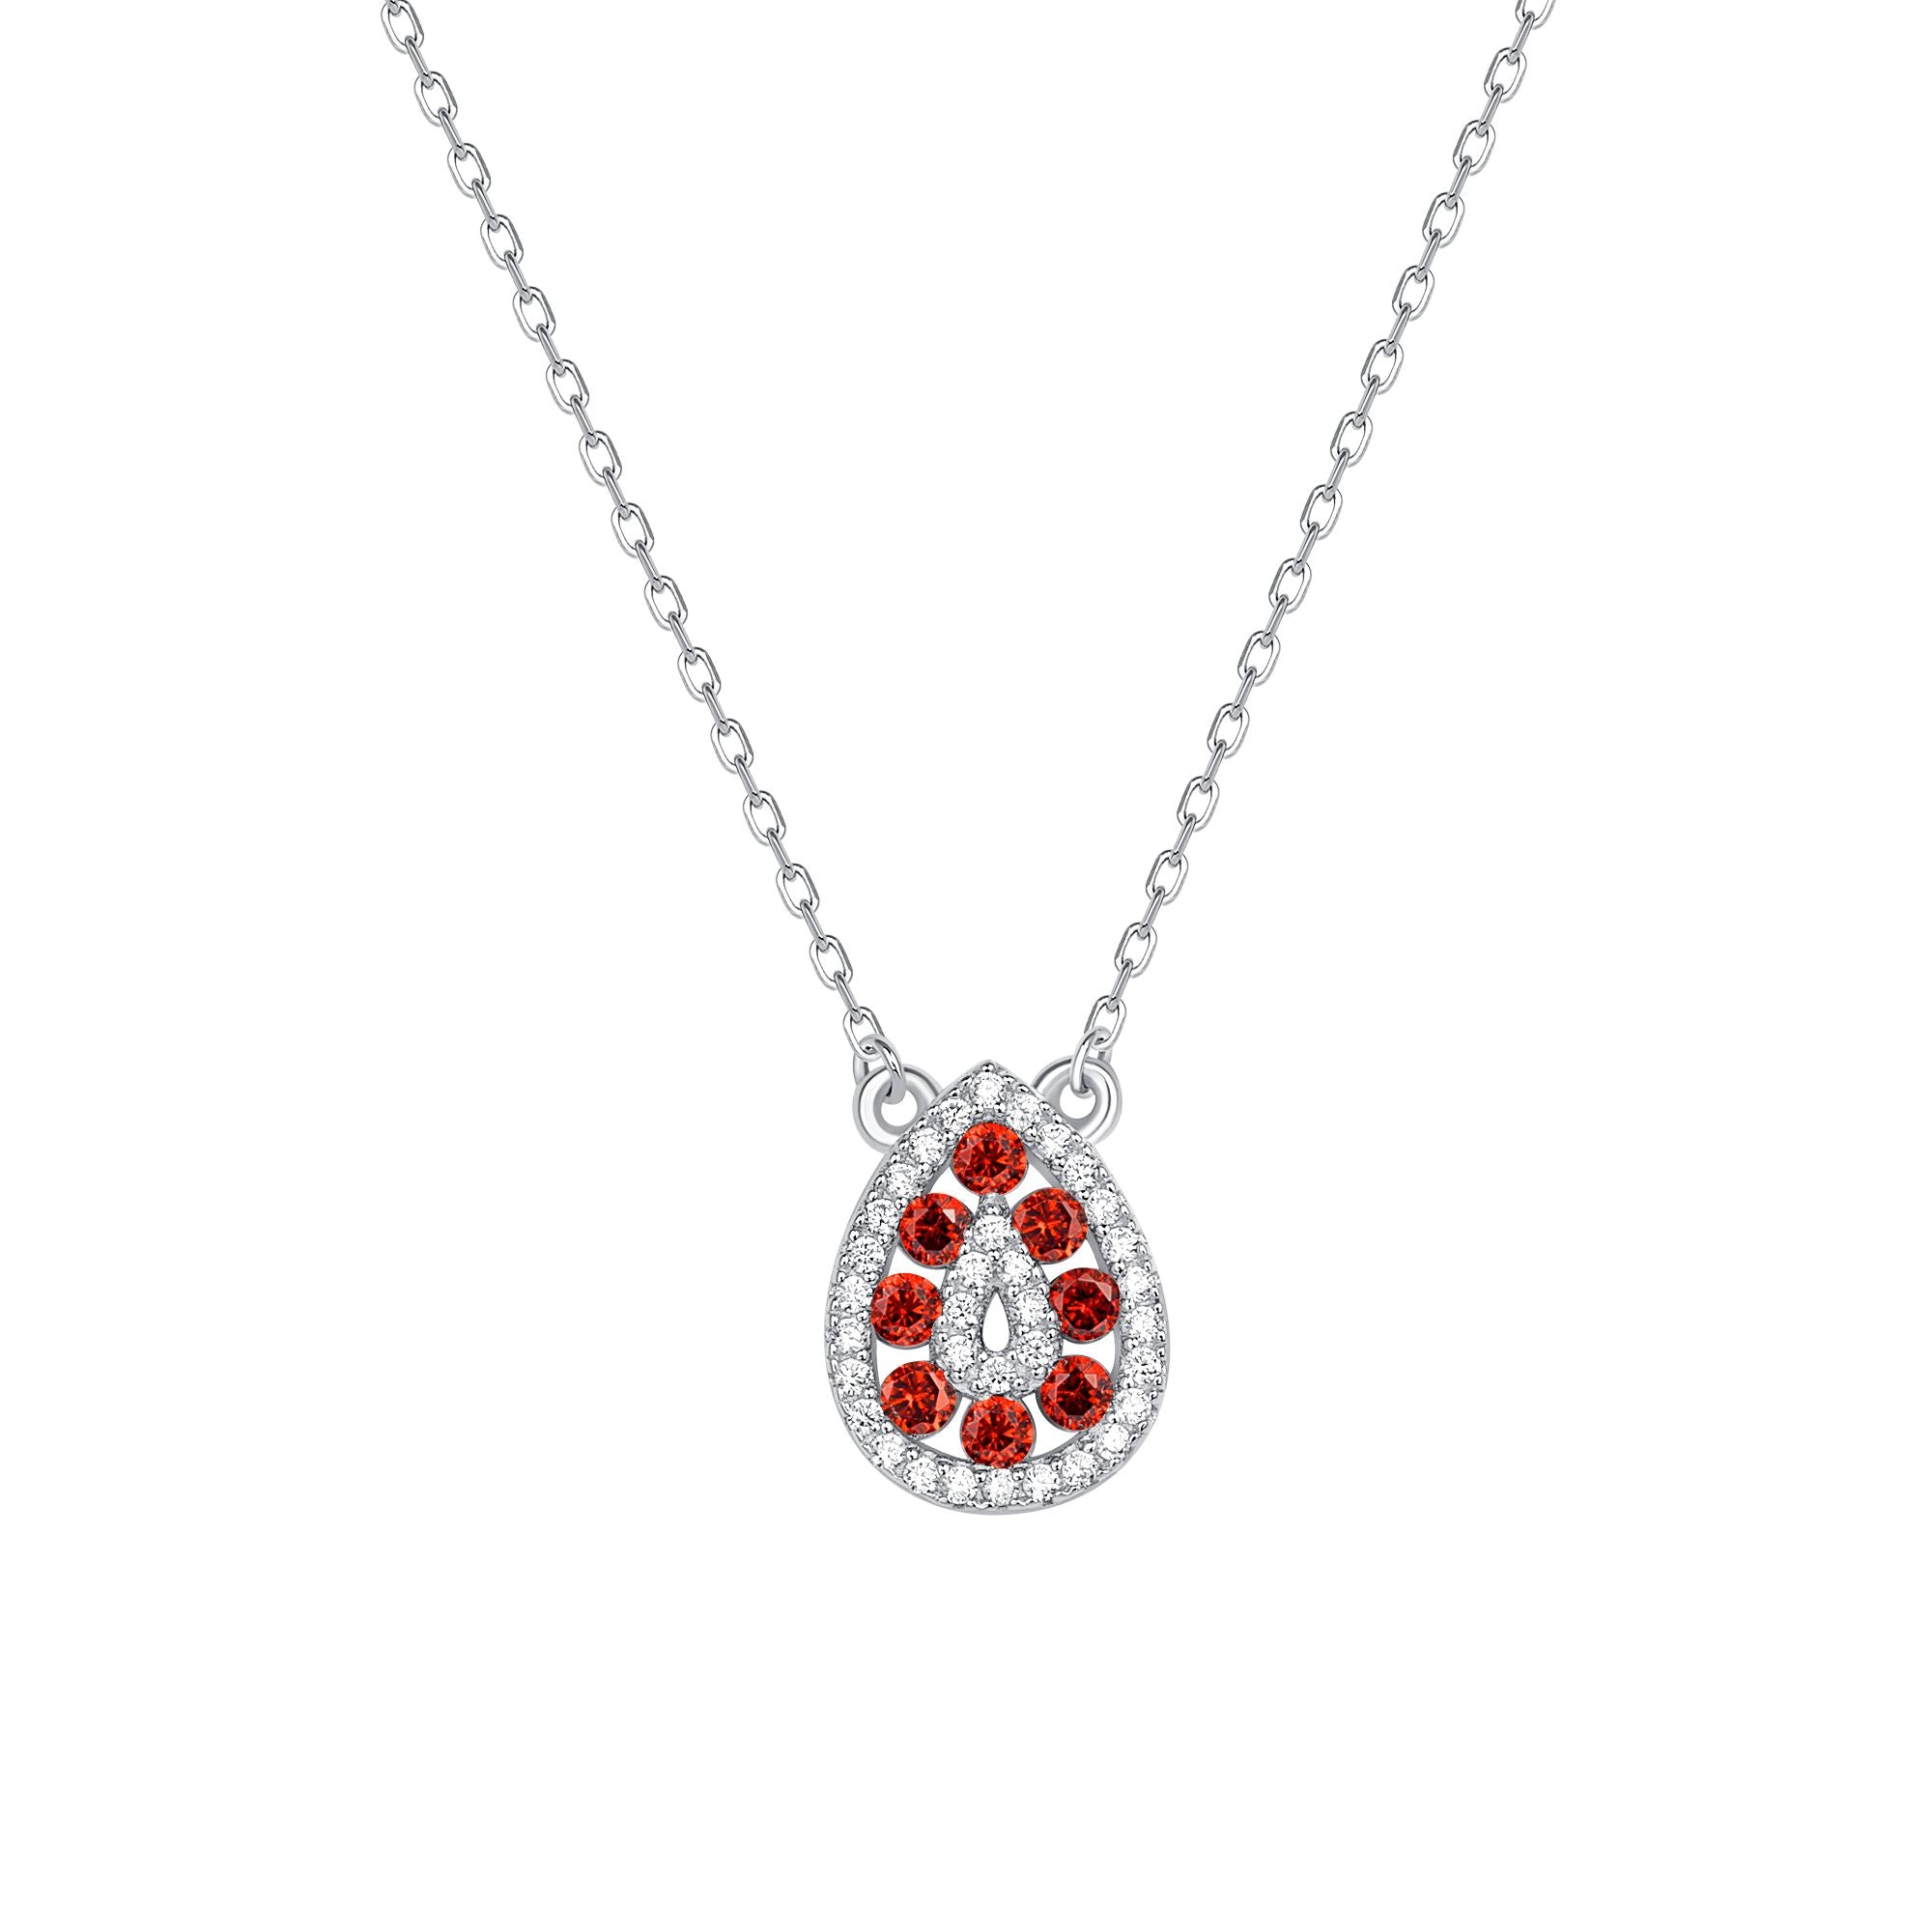 925 Sterling Silver Round Cut Red &amp; White CZ Alternating Rows Teardrop Pendant &amp; Earrings Jewelry Set